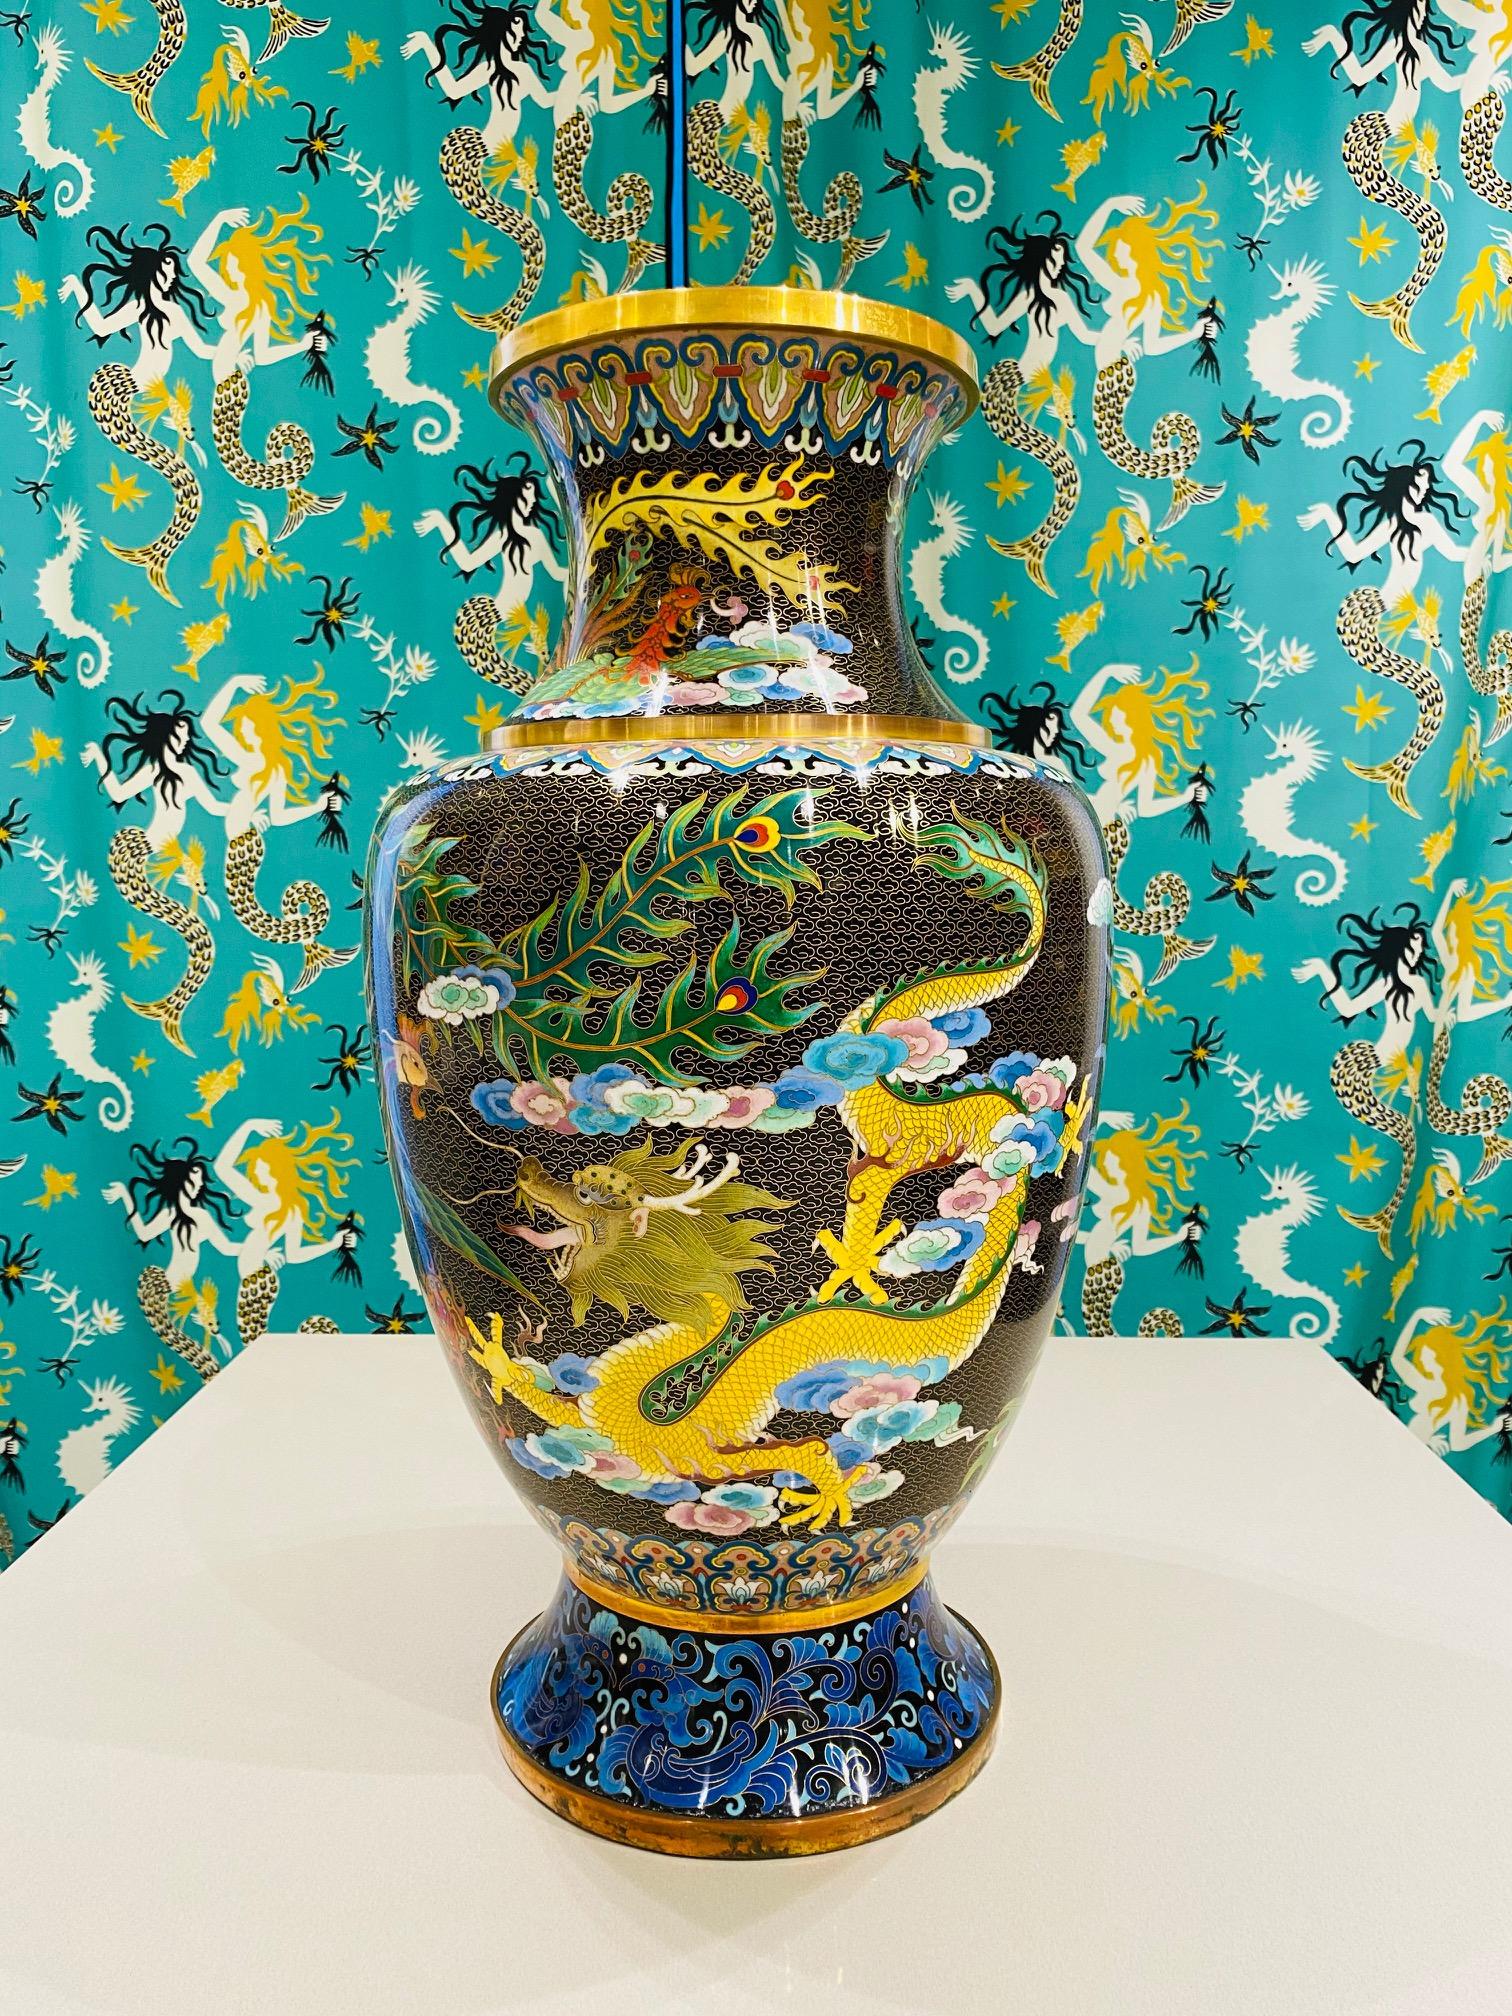 1940s Chinese Cloisonné large vase. Cloisonné is an ancient technique which incorporates decorative materials like enamel, colored glass, or gemstones into metalwork objects bound by wire on metal backing. The vase features extraordinary depictions